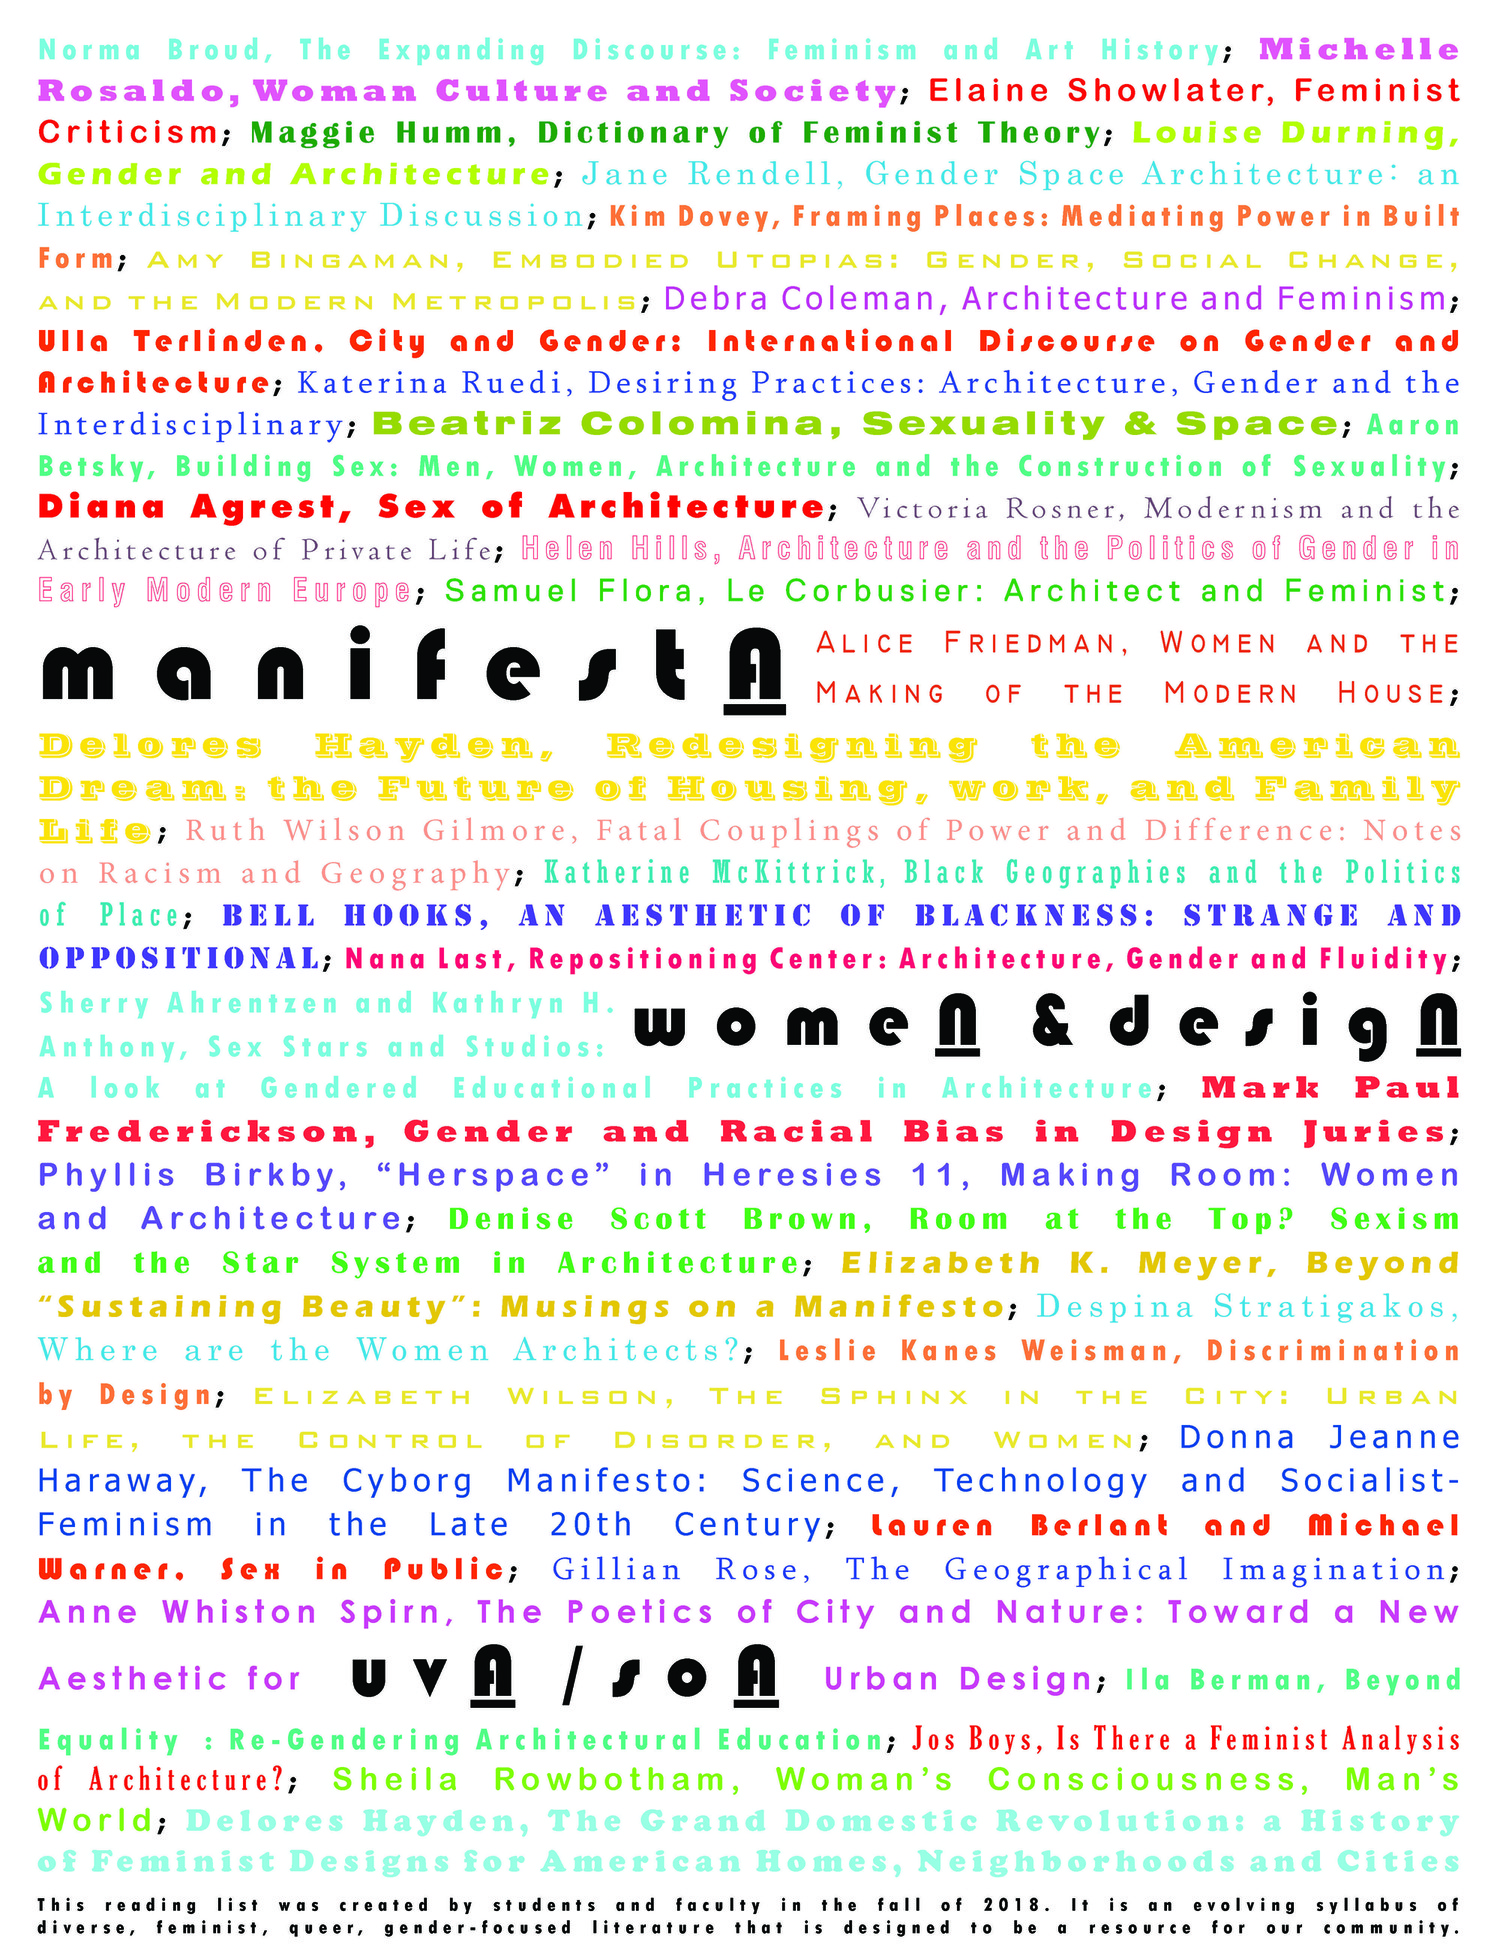 ManifestA poster. As an integral part of their programming, manifestA hosts regular syllabus talks focused on writings and scholarship by and about women, design, feminism and equity open to all at the School.